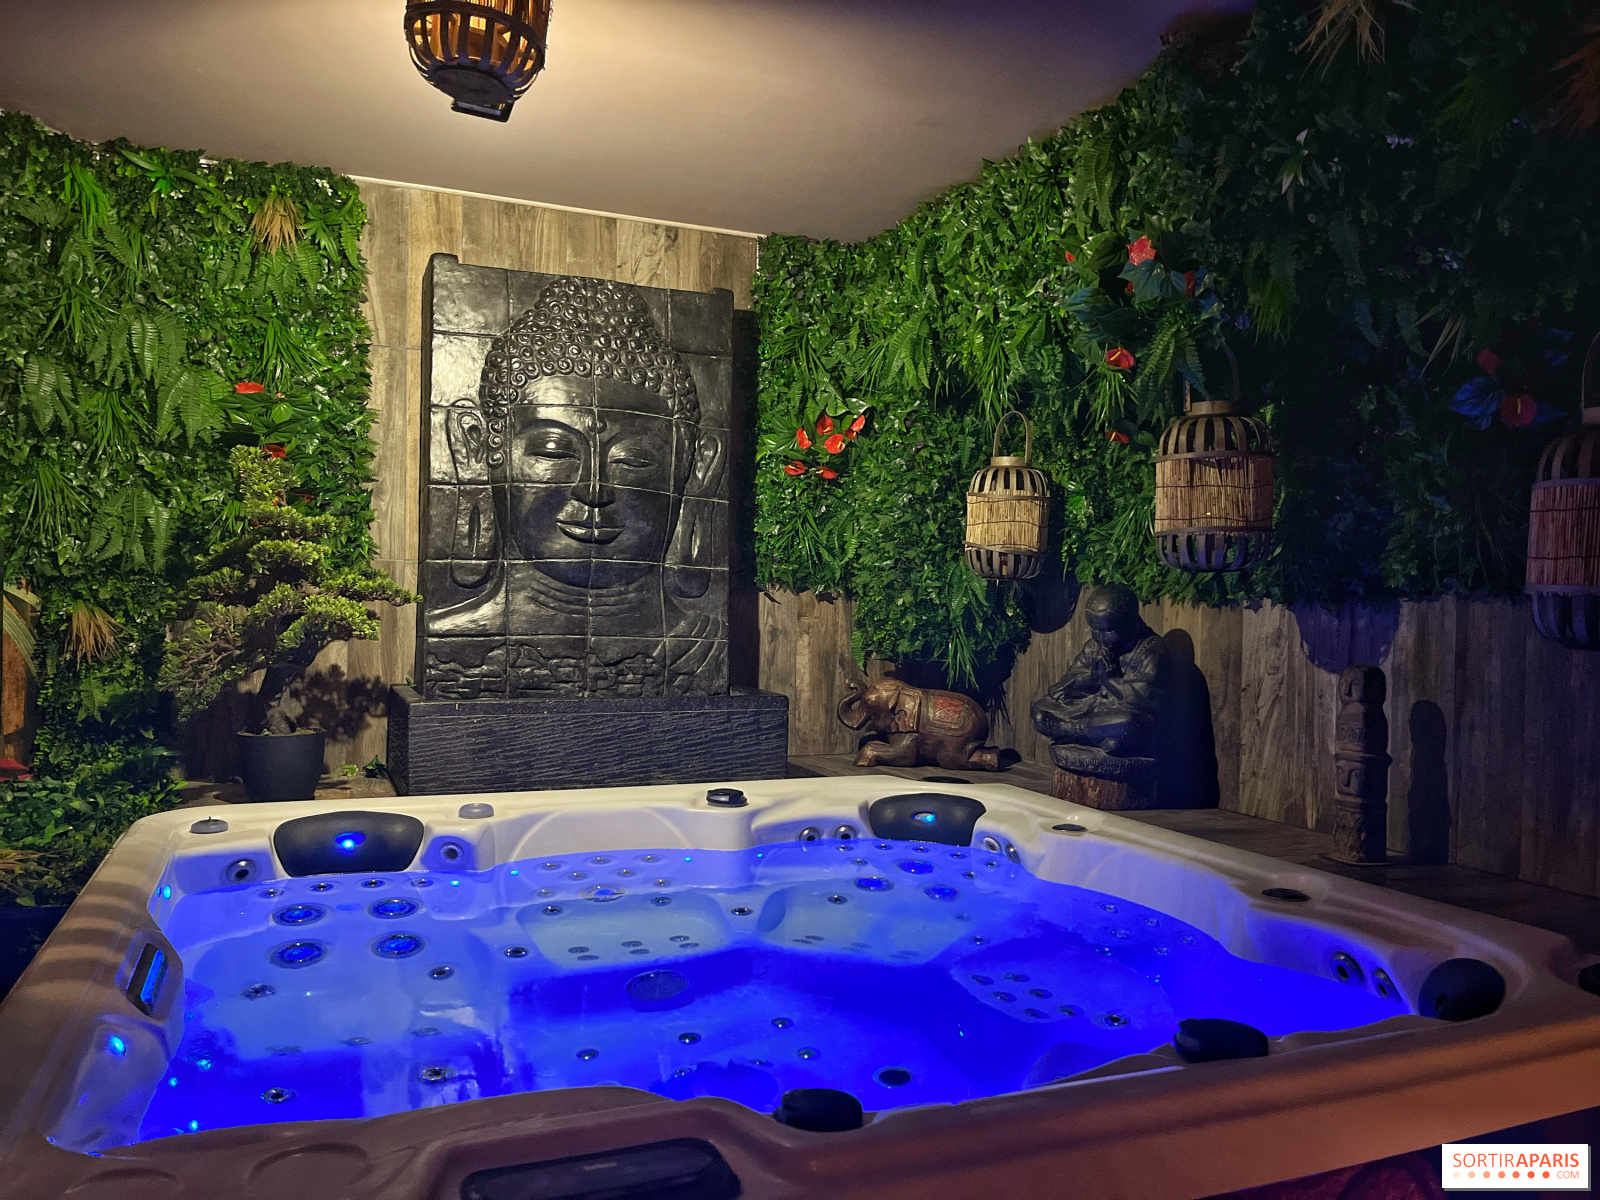 Spa Luxury Paris, an immersive relaxing moment in a dreamy setting 